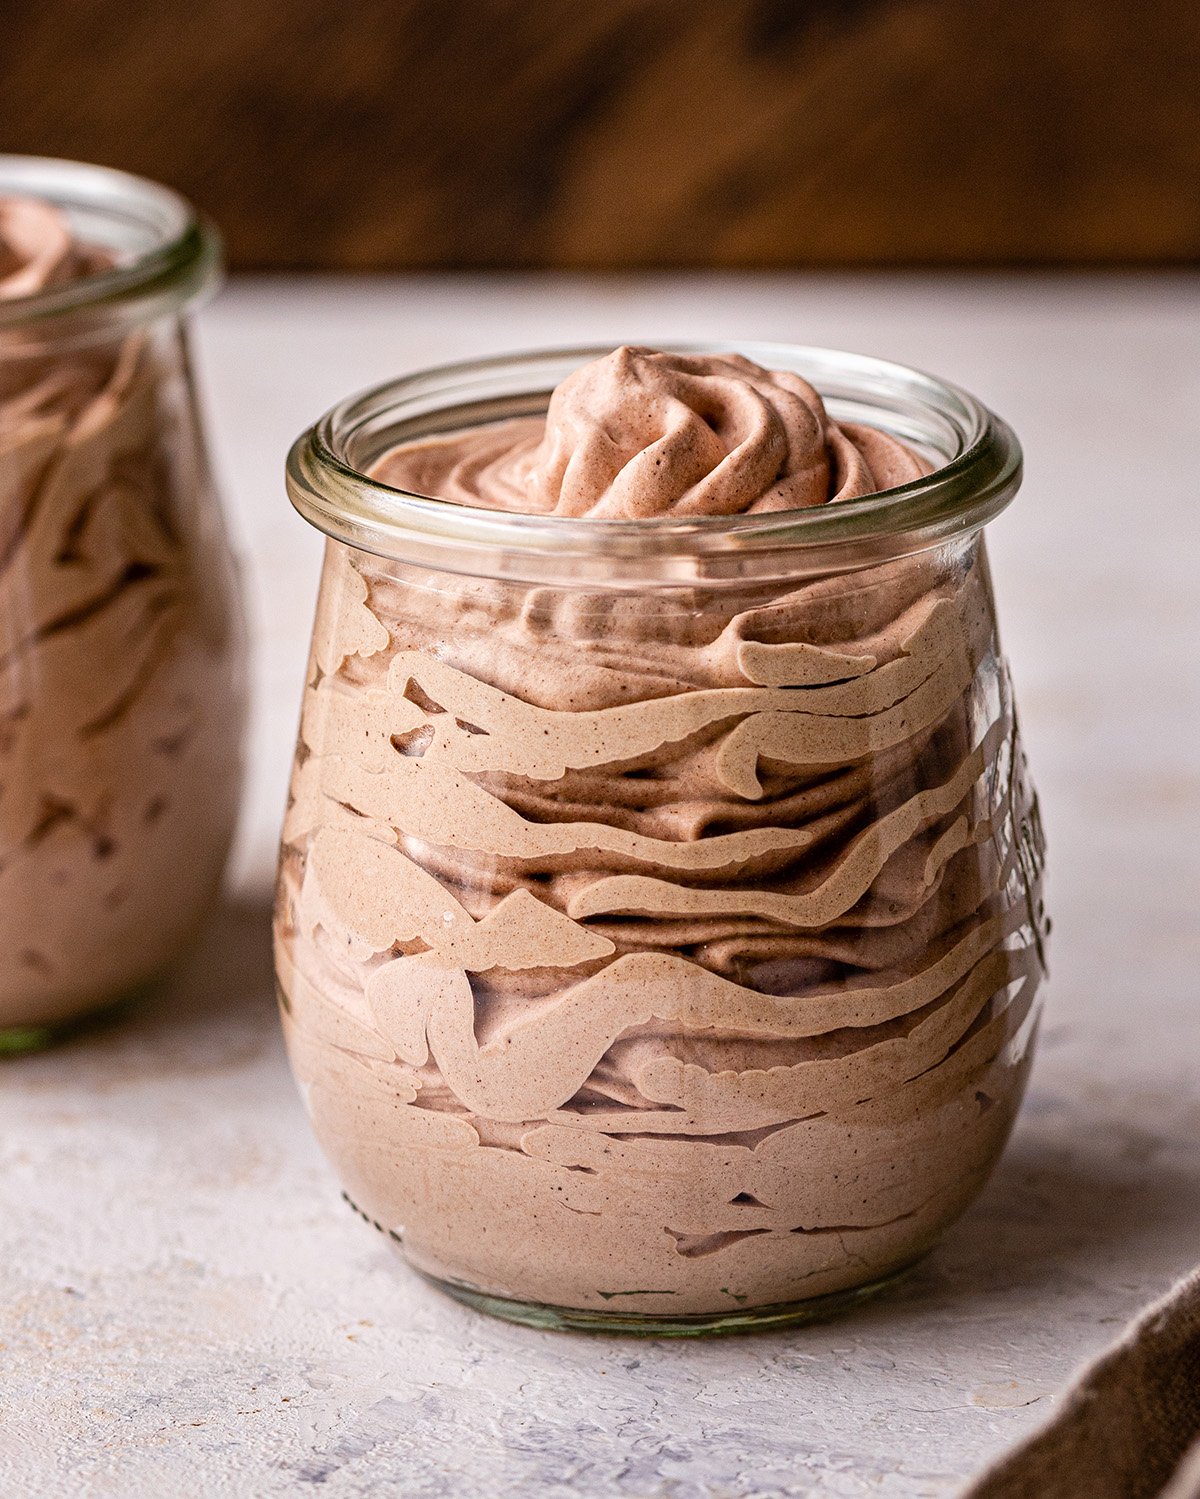 Chocolate Whipped Cream piped into a glass jar 